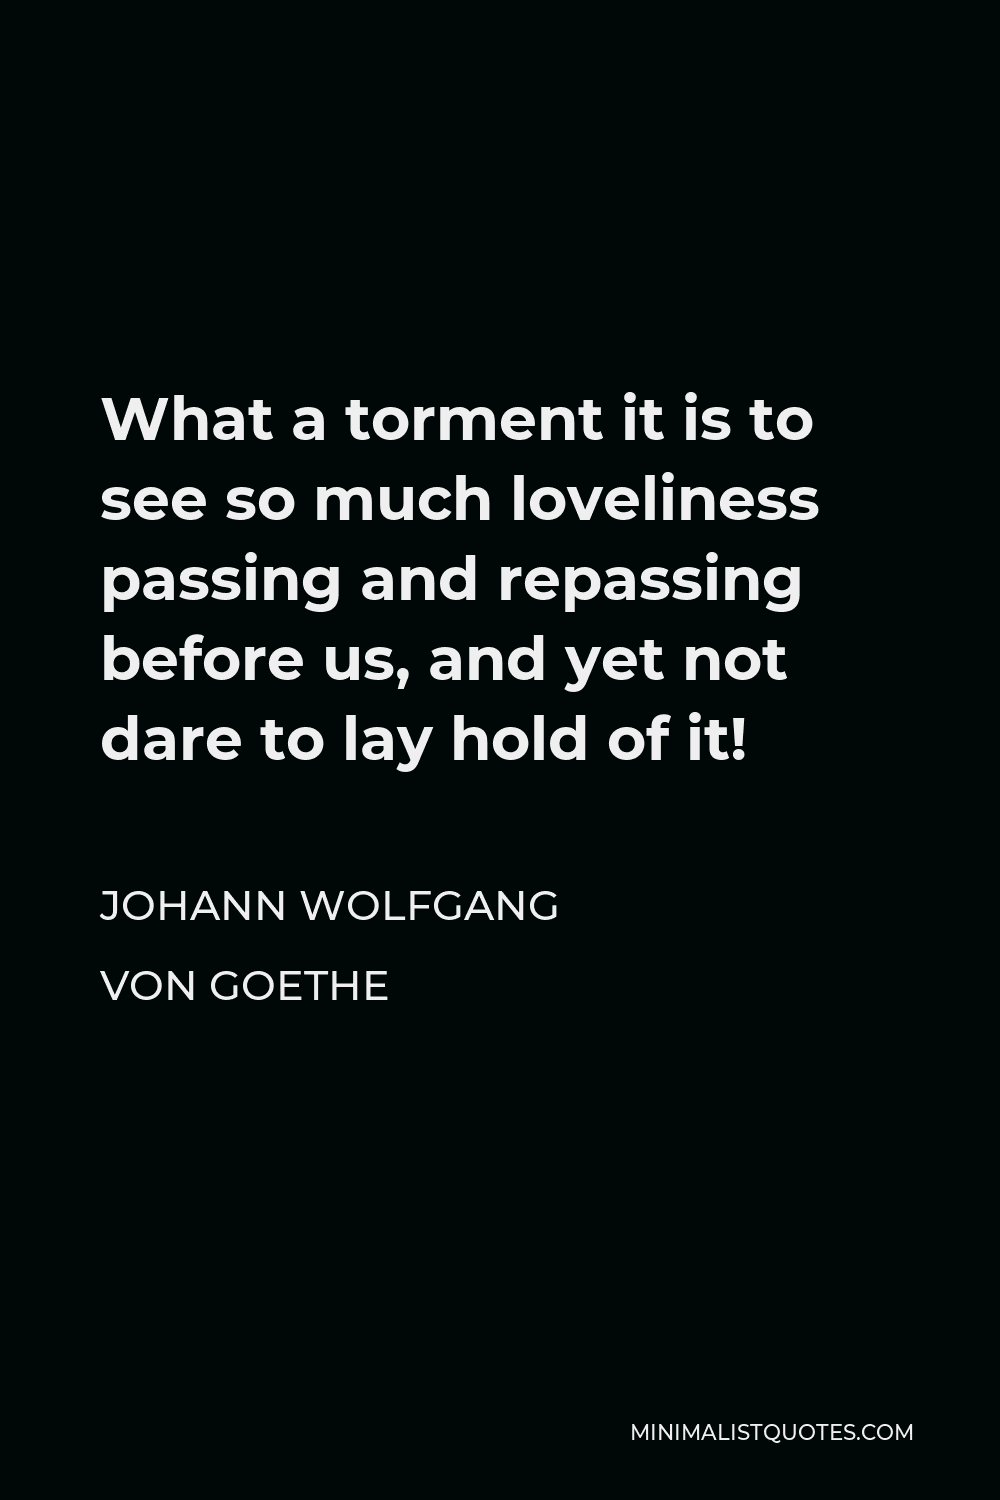 Johann Wolfgang von Goethe Quote: What a torment it is to see so much